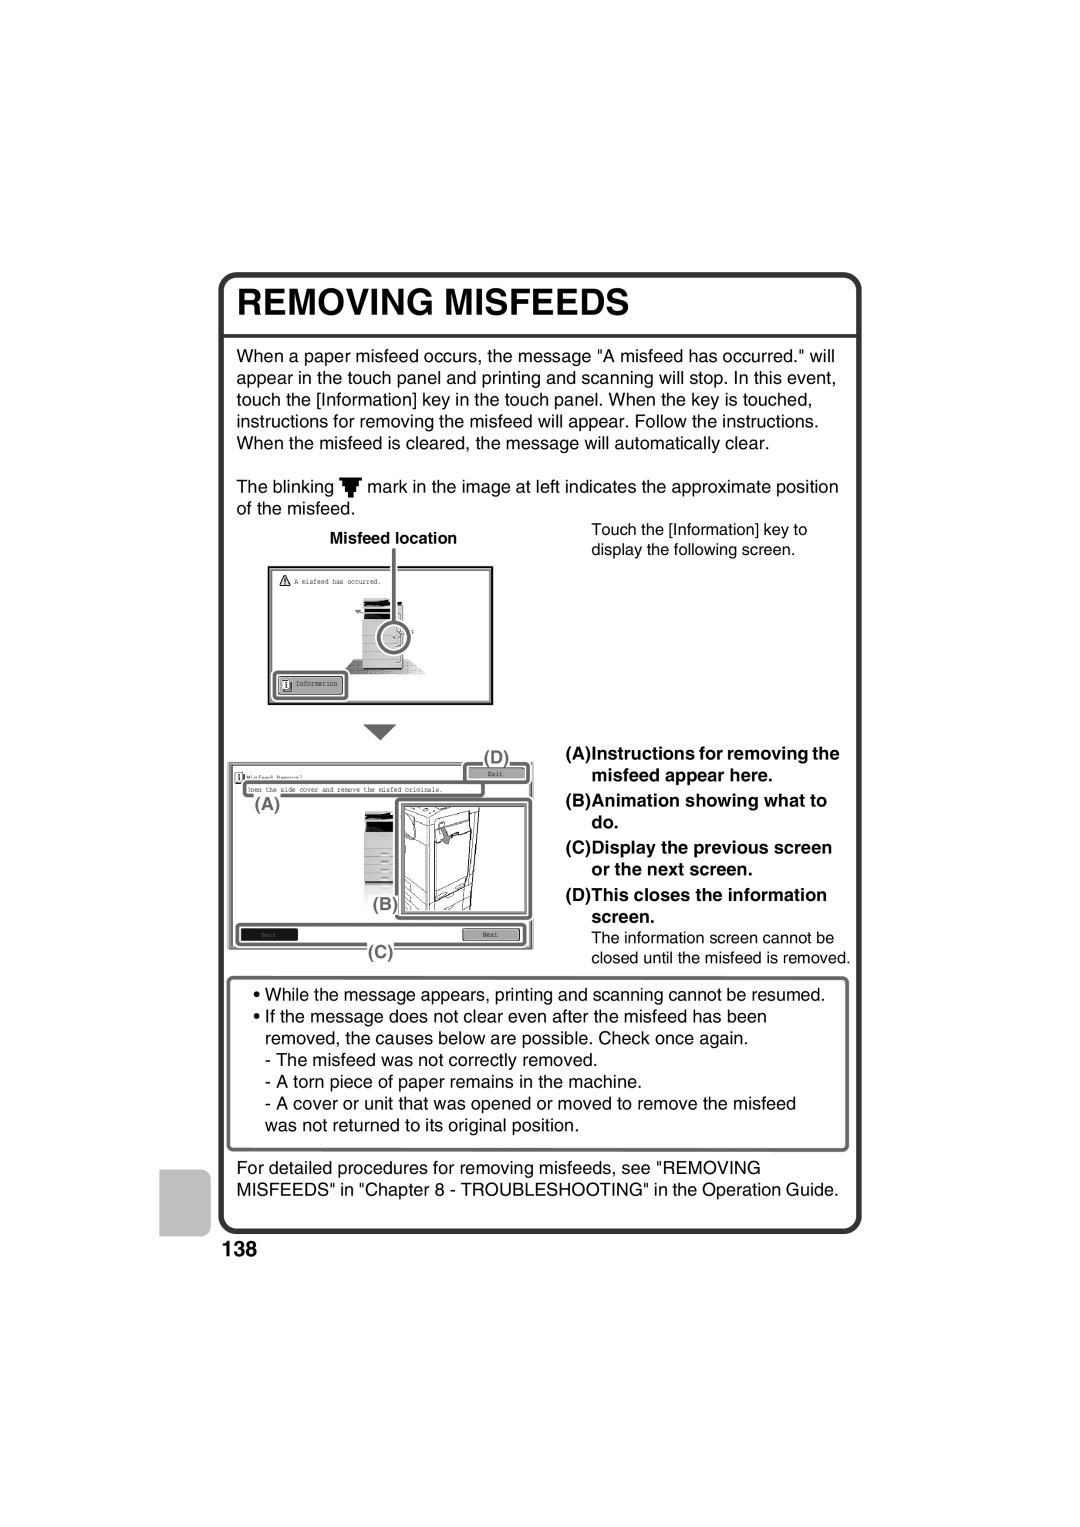 Sharp MX-B401 Removing Misfeeds, AInstructions for removing the, misfeed appear here, BAnimation showing what to do 